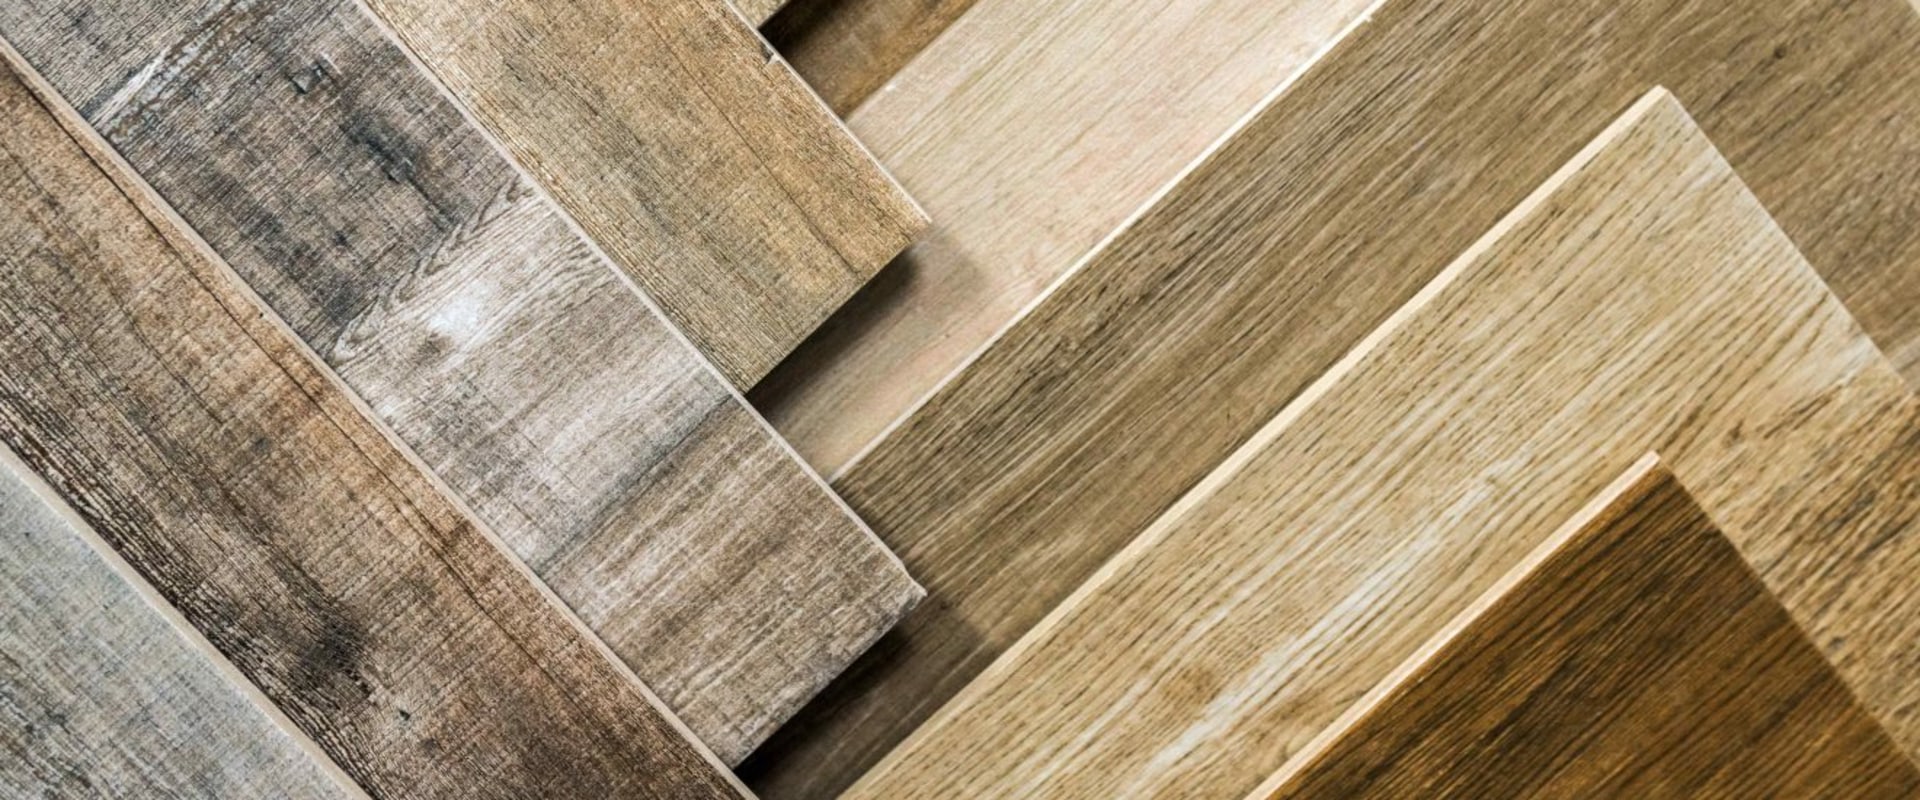 Types of Wood Used for Wooden Flooring